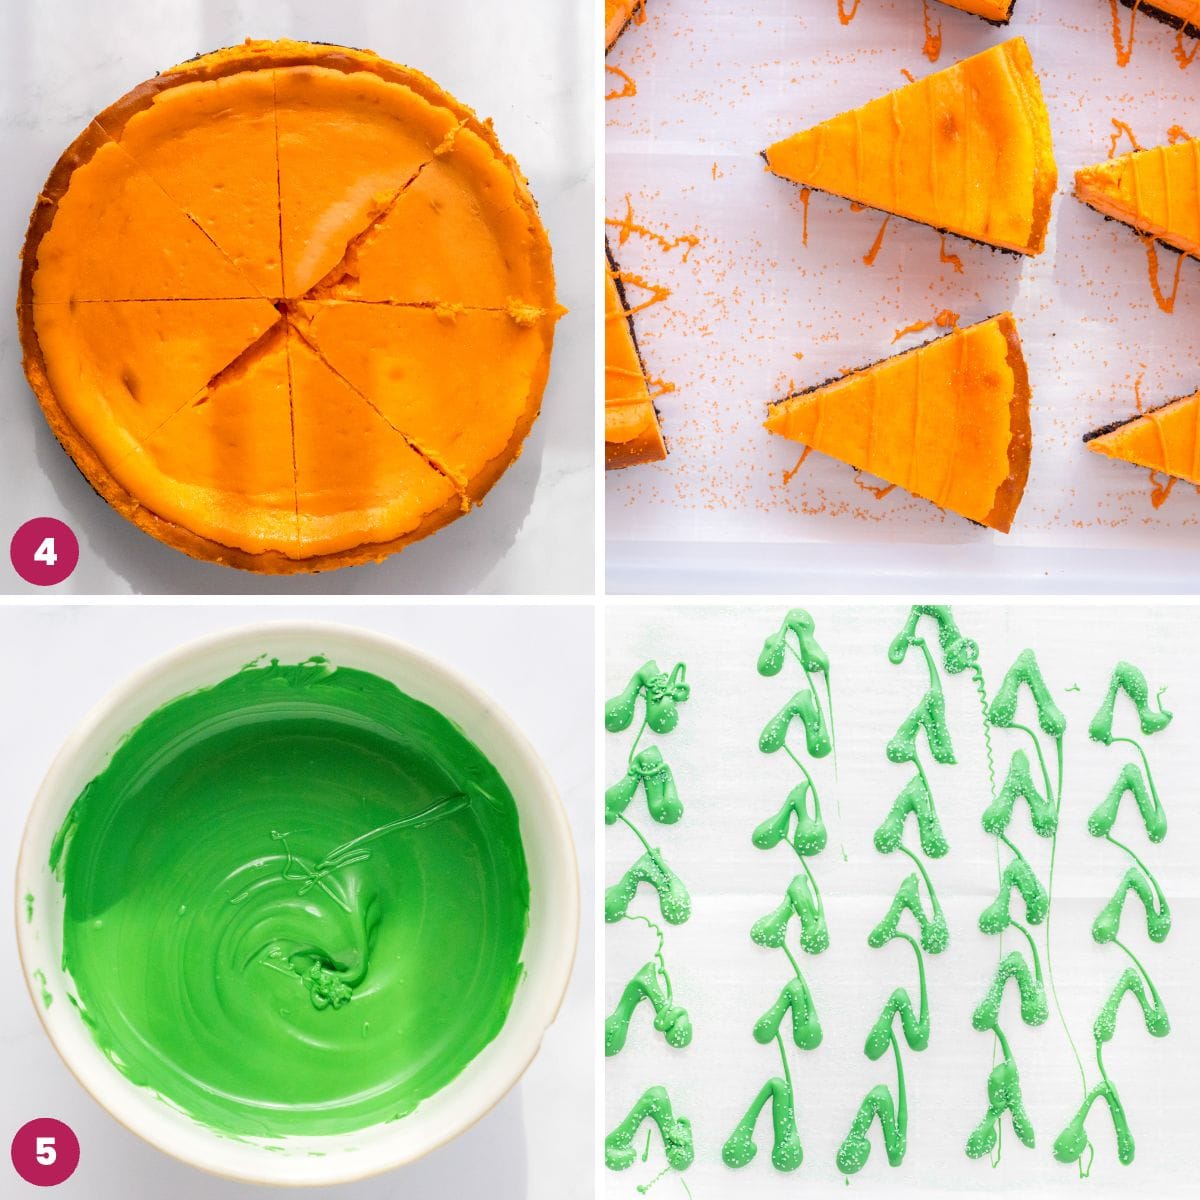 Collage of four images showing how to bake the cheesecake and decorate it with green candy melts